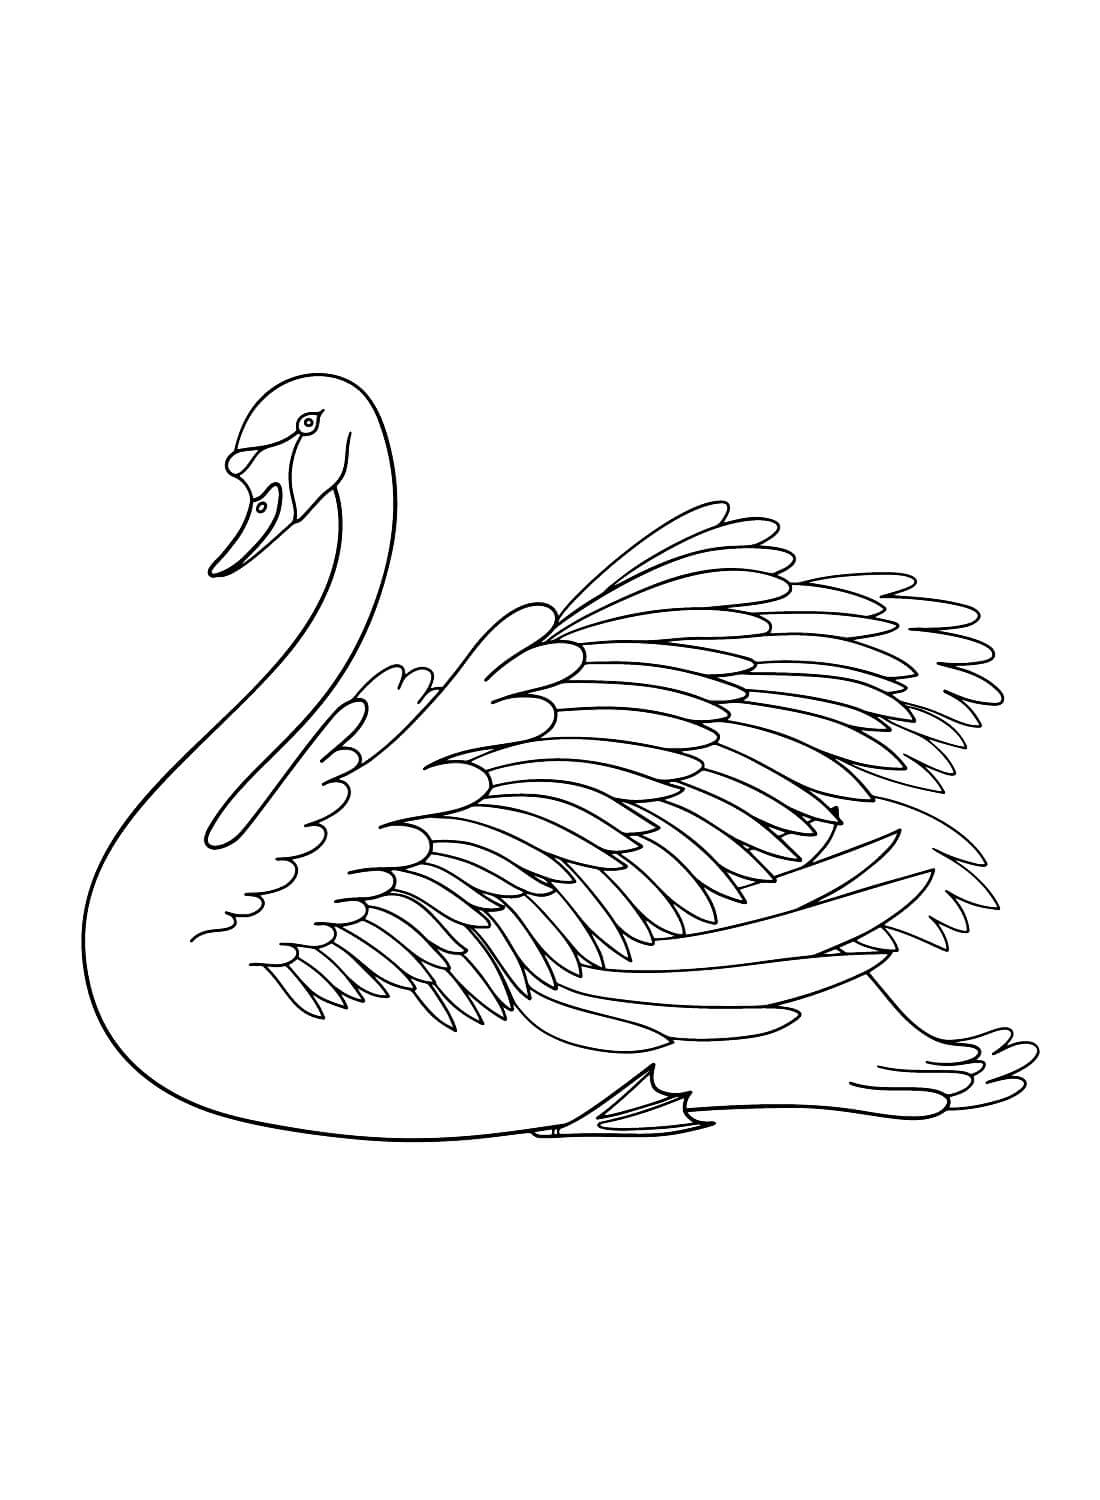 Swan 1 coloring page - Download, Print or Color Online for Free